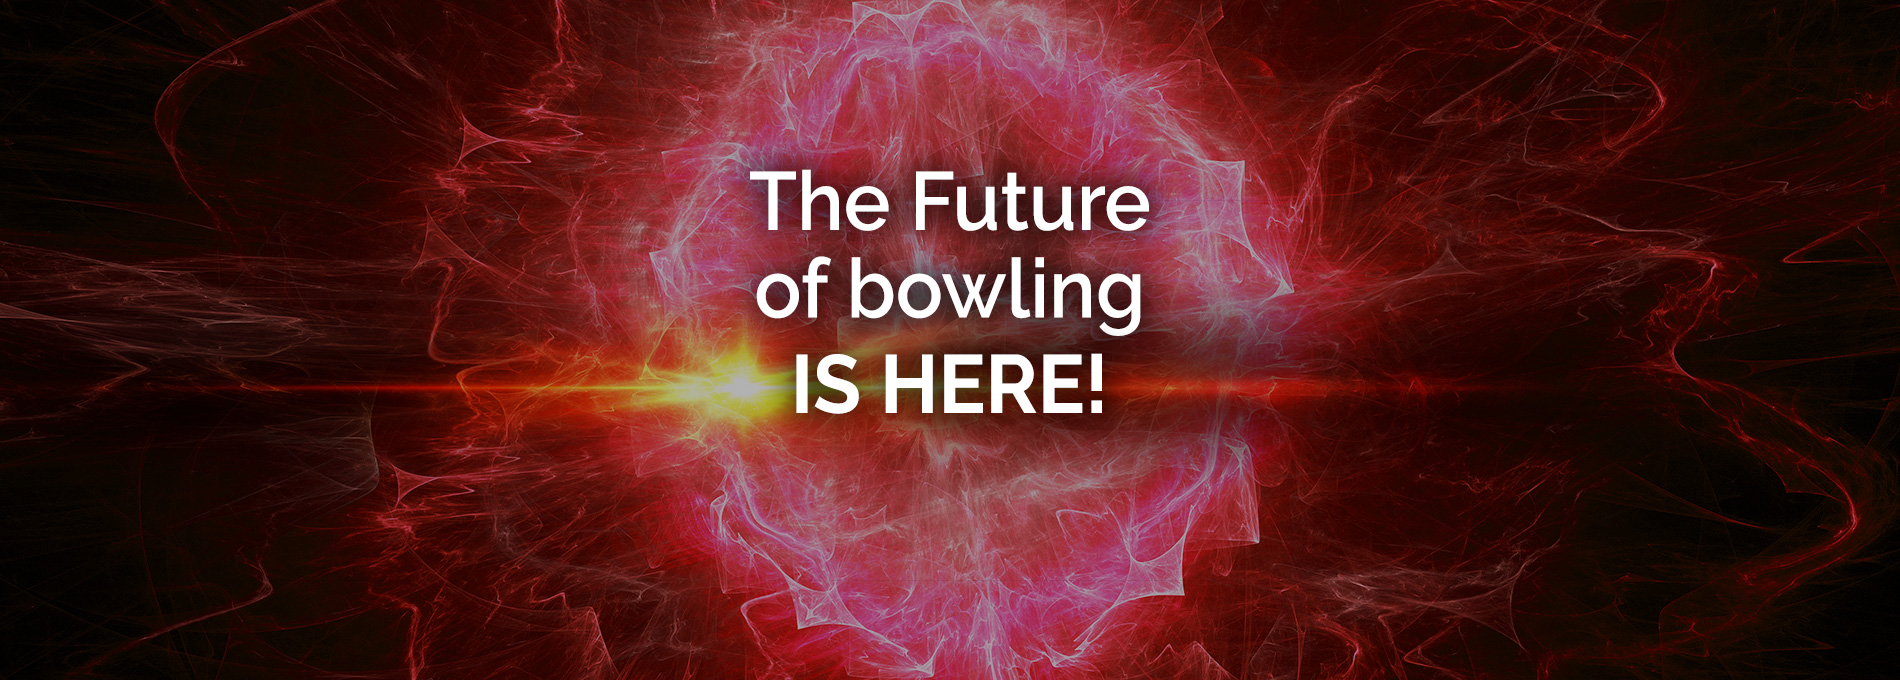 qubicaamf-bowling-the-future-of-bowling-is-here banner